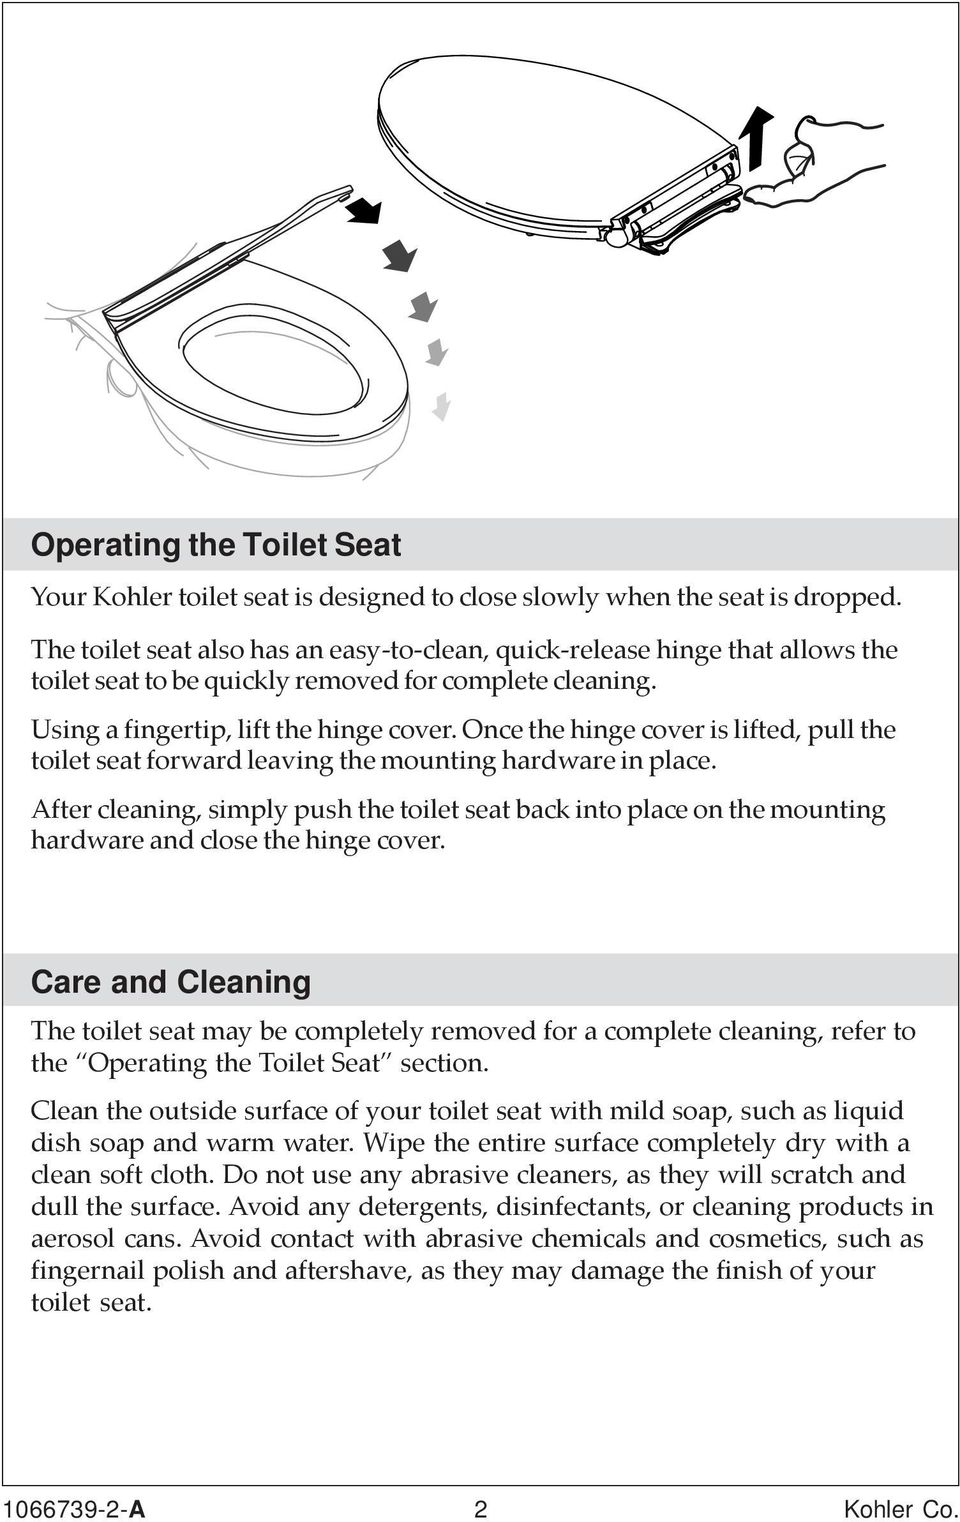 Once the hinge cover is lifted, pull the toilet seat forward leaving the mounting hardware in place.